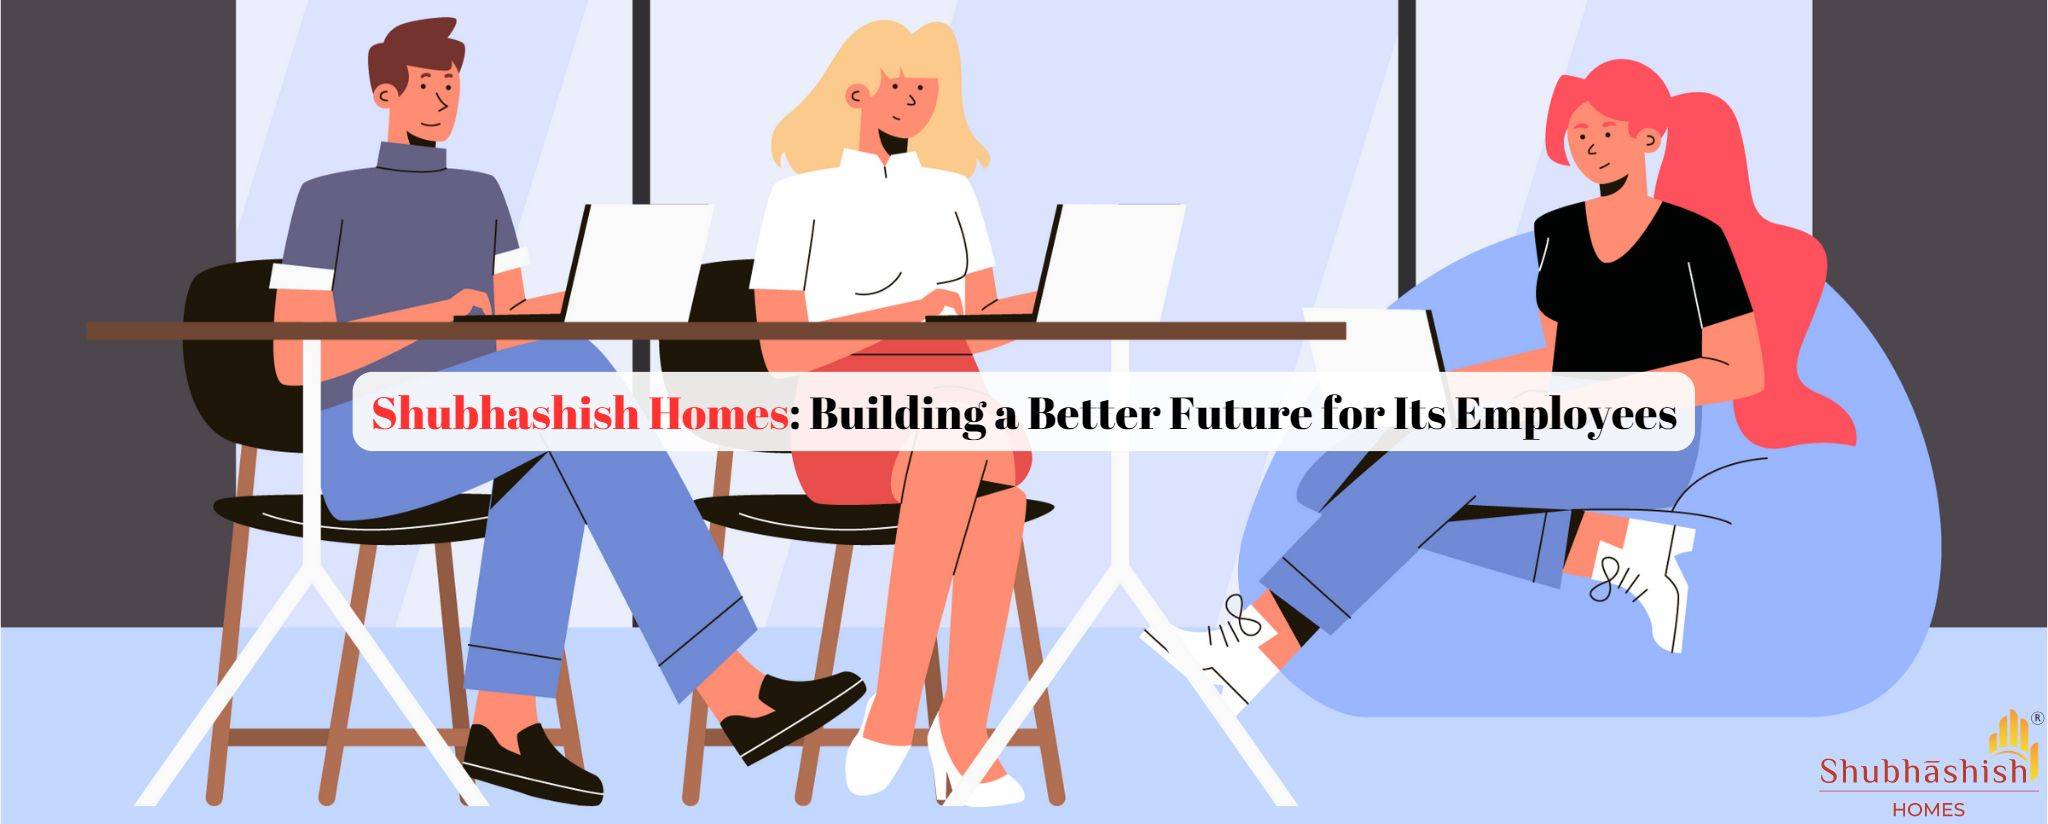 Shubhashish Homes: Building a Better Future for Its Employees